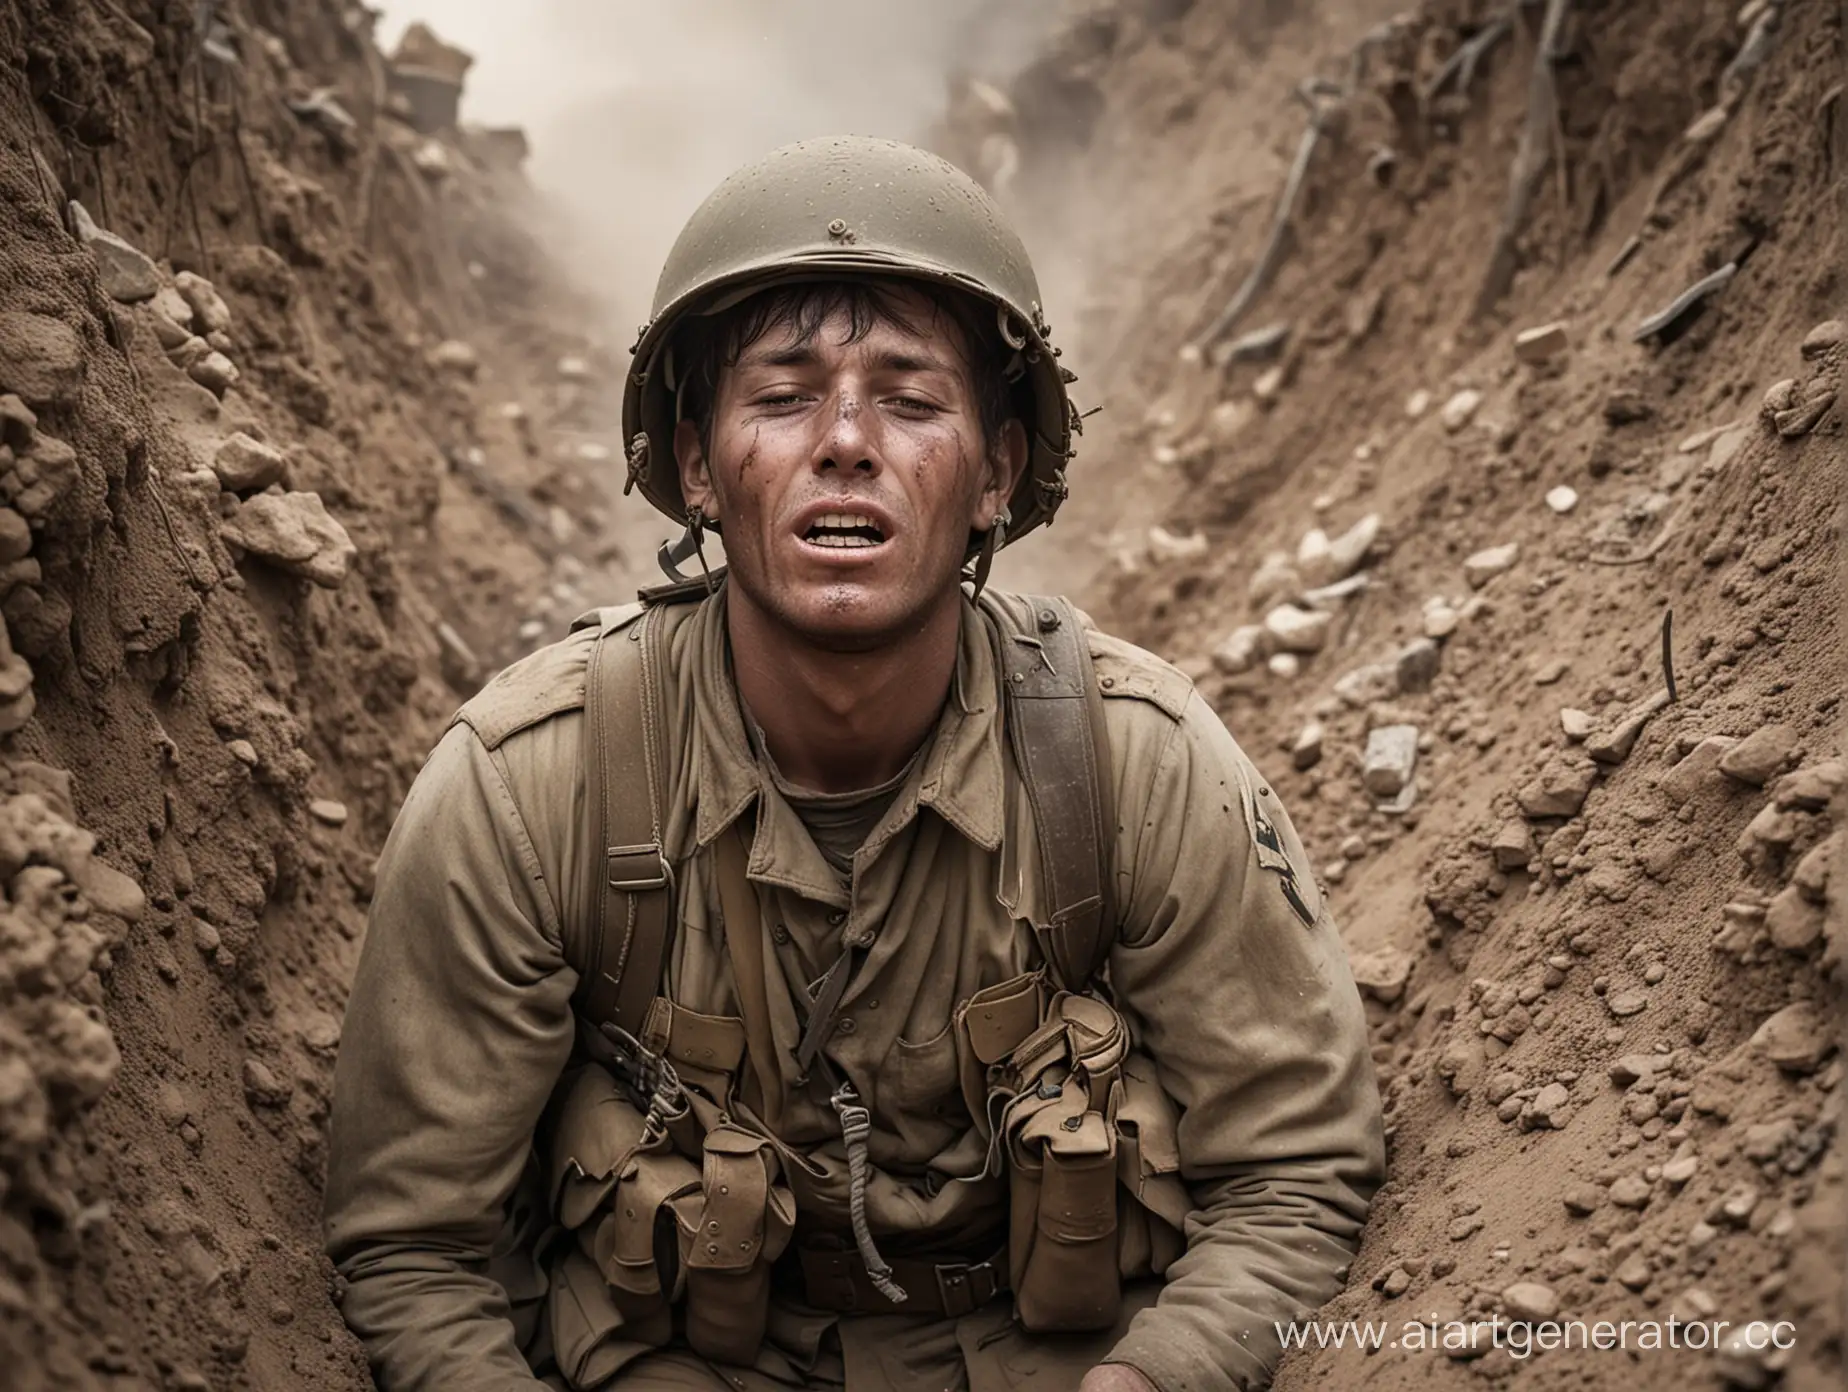 Wounded-Soldier-in-Trench-Breathing-Heavily-After-Combat